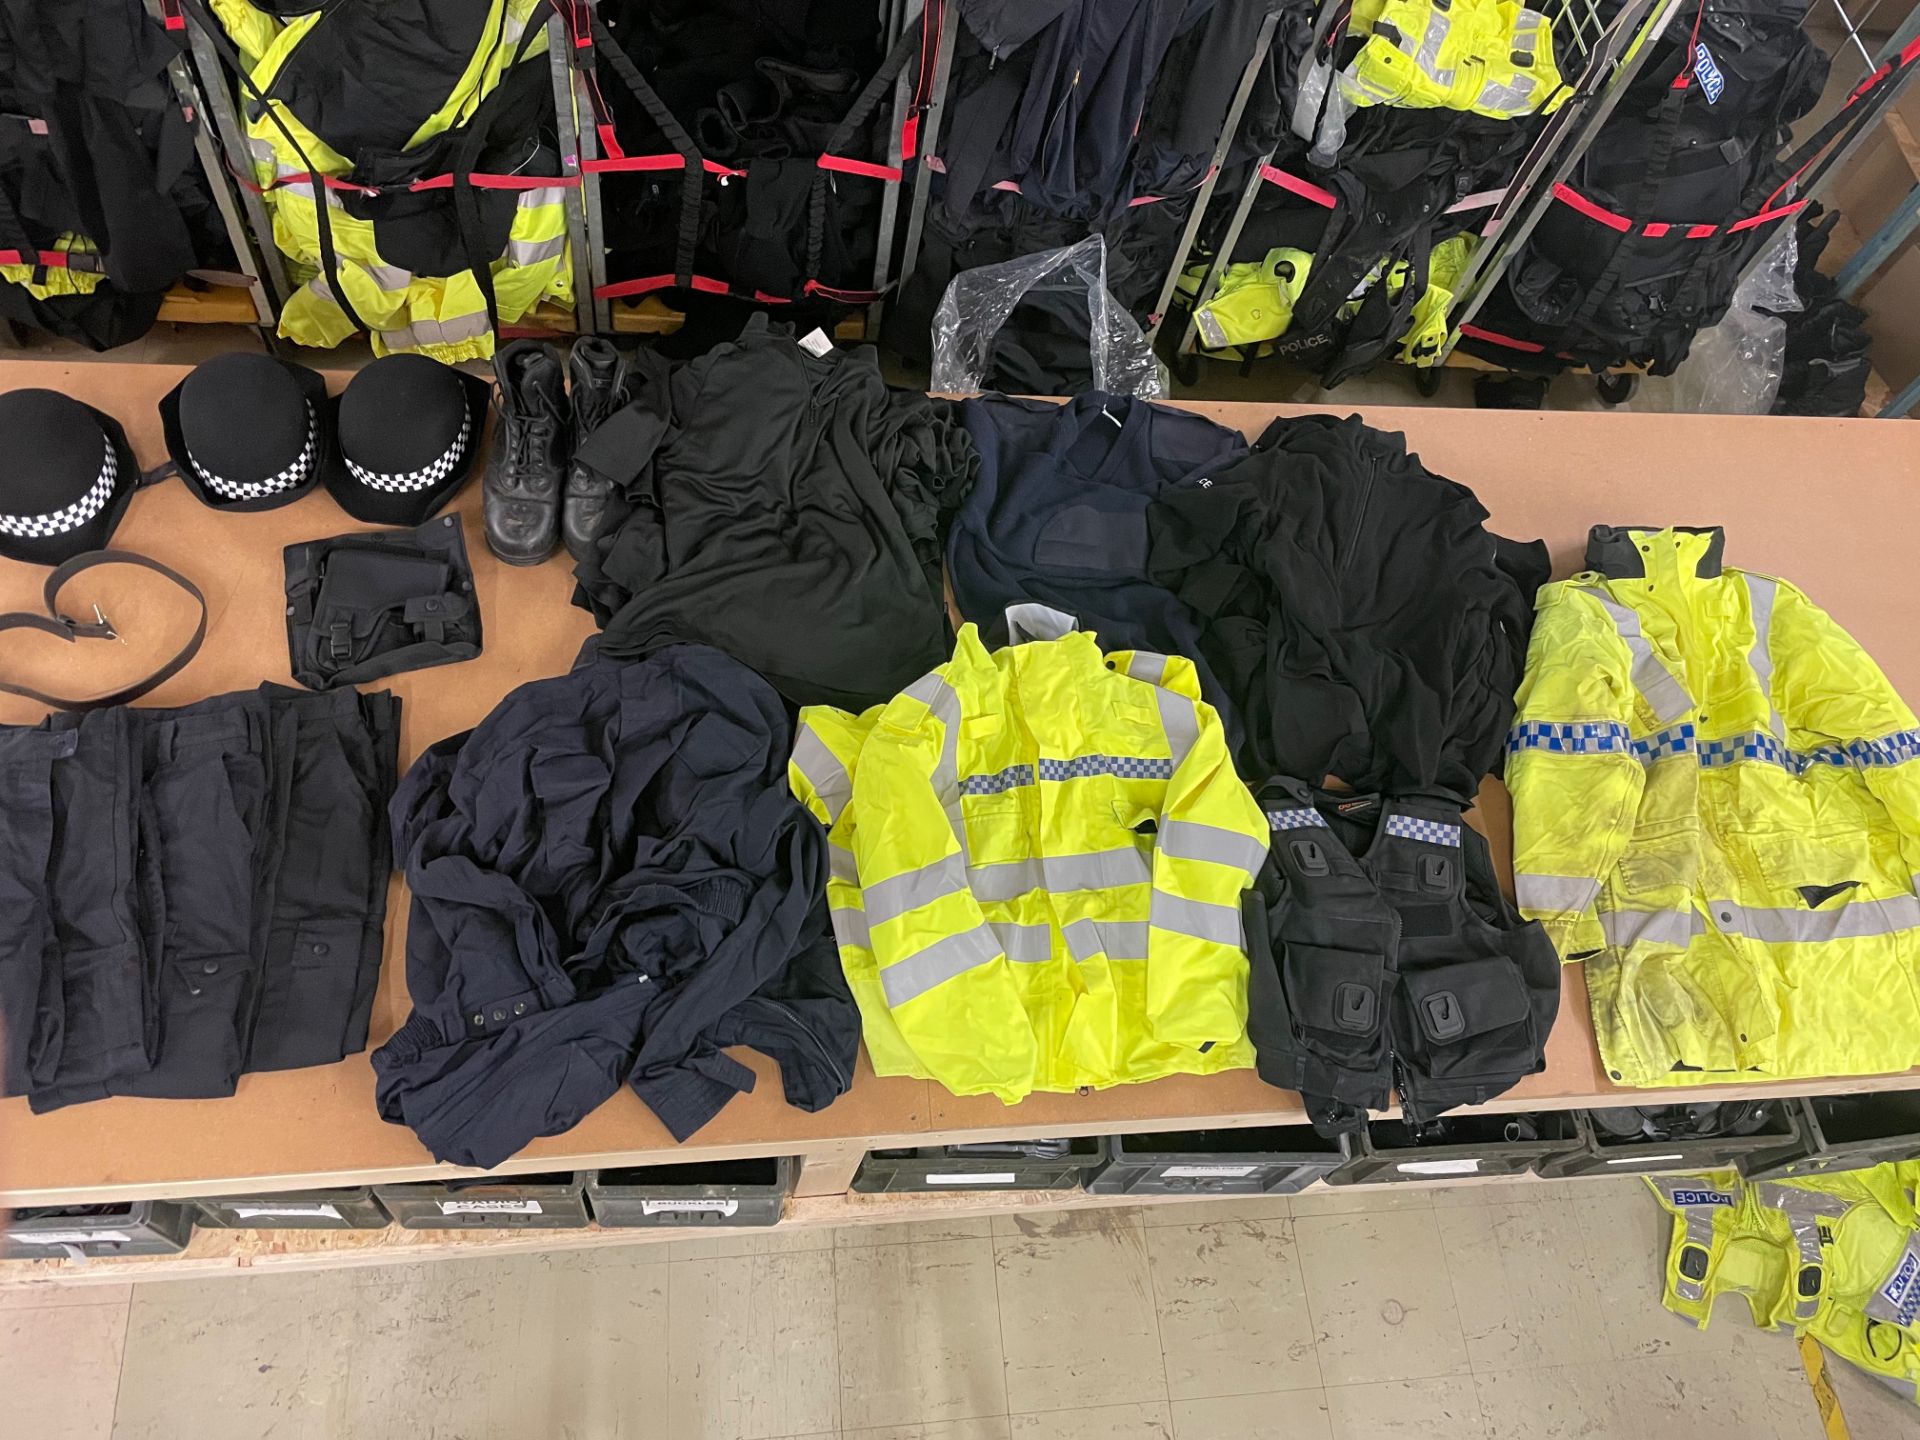 5 X BAGS EX POLICE CLOTHING & ACCESSORIES - RRP £1375.00 - Image 2 of 12